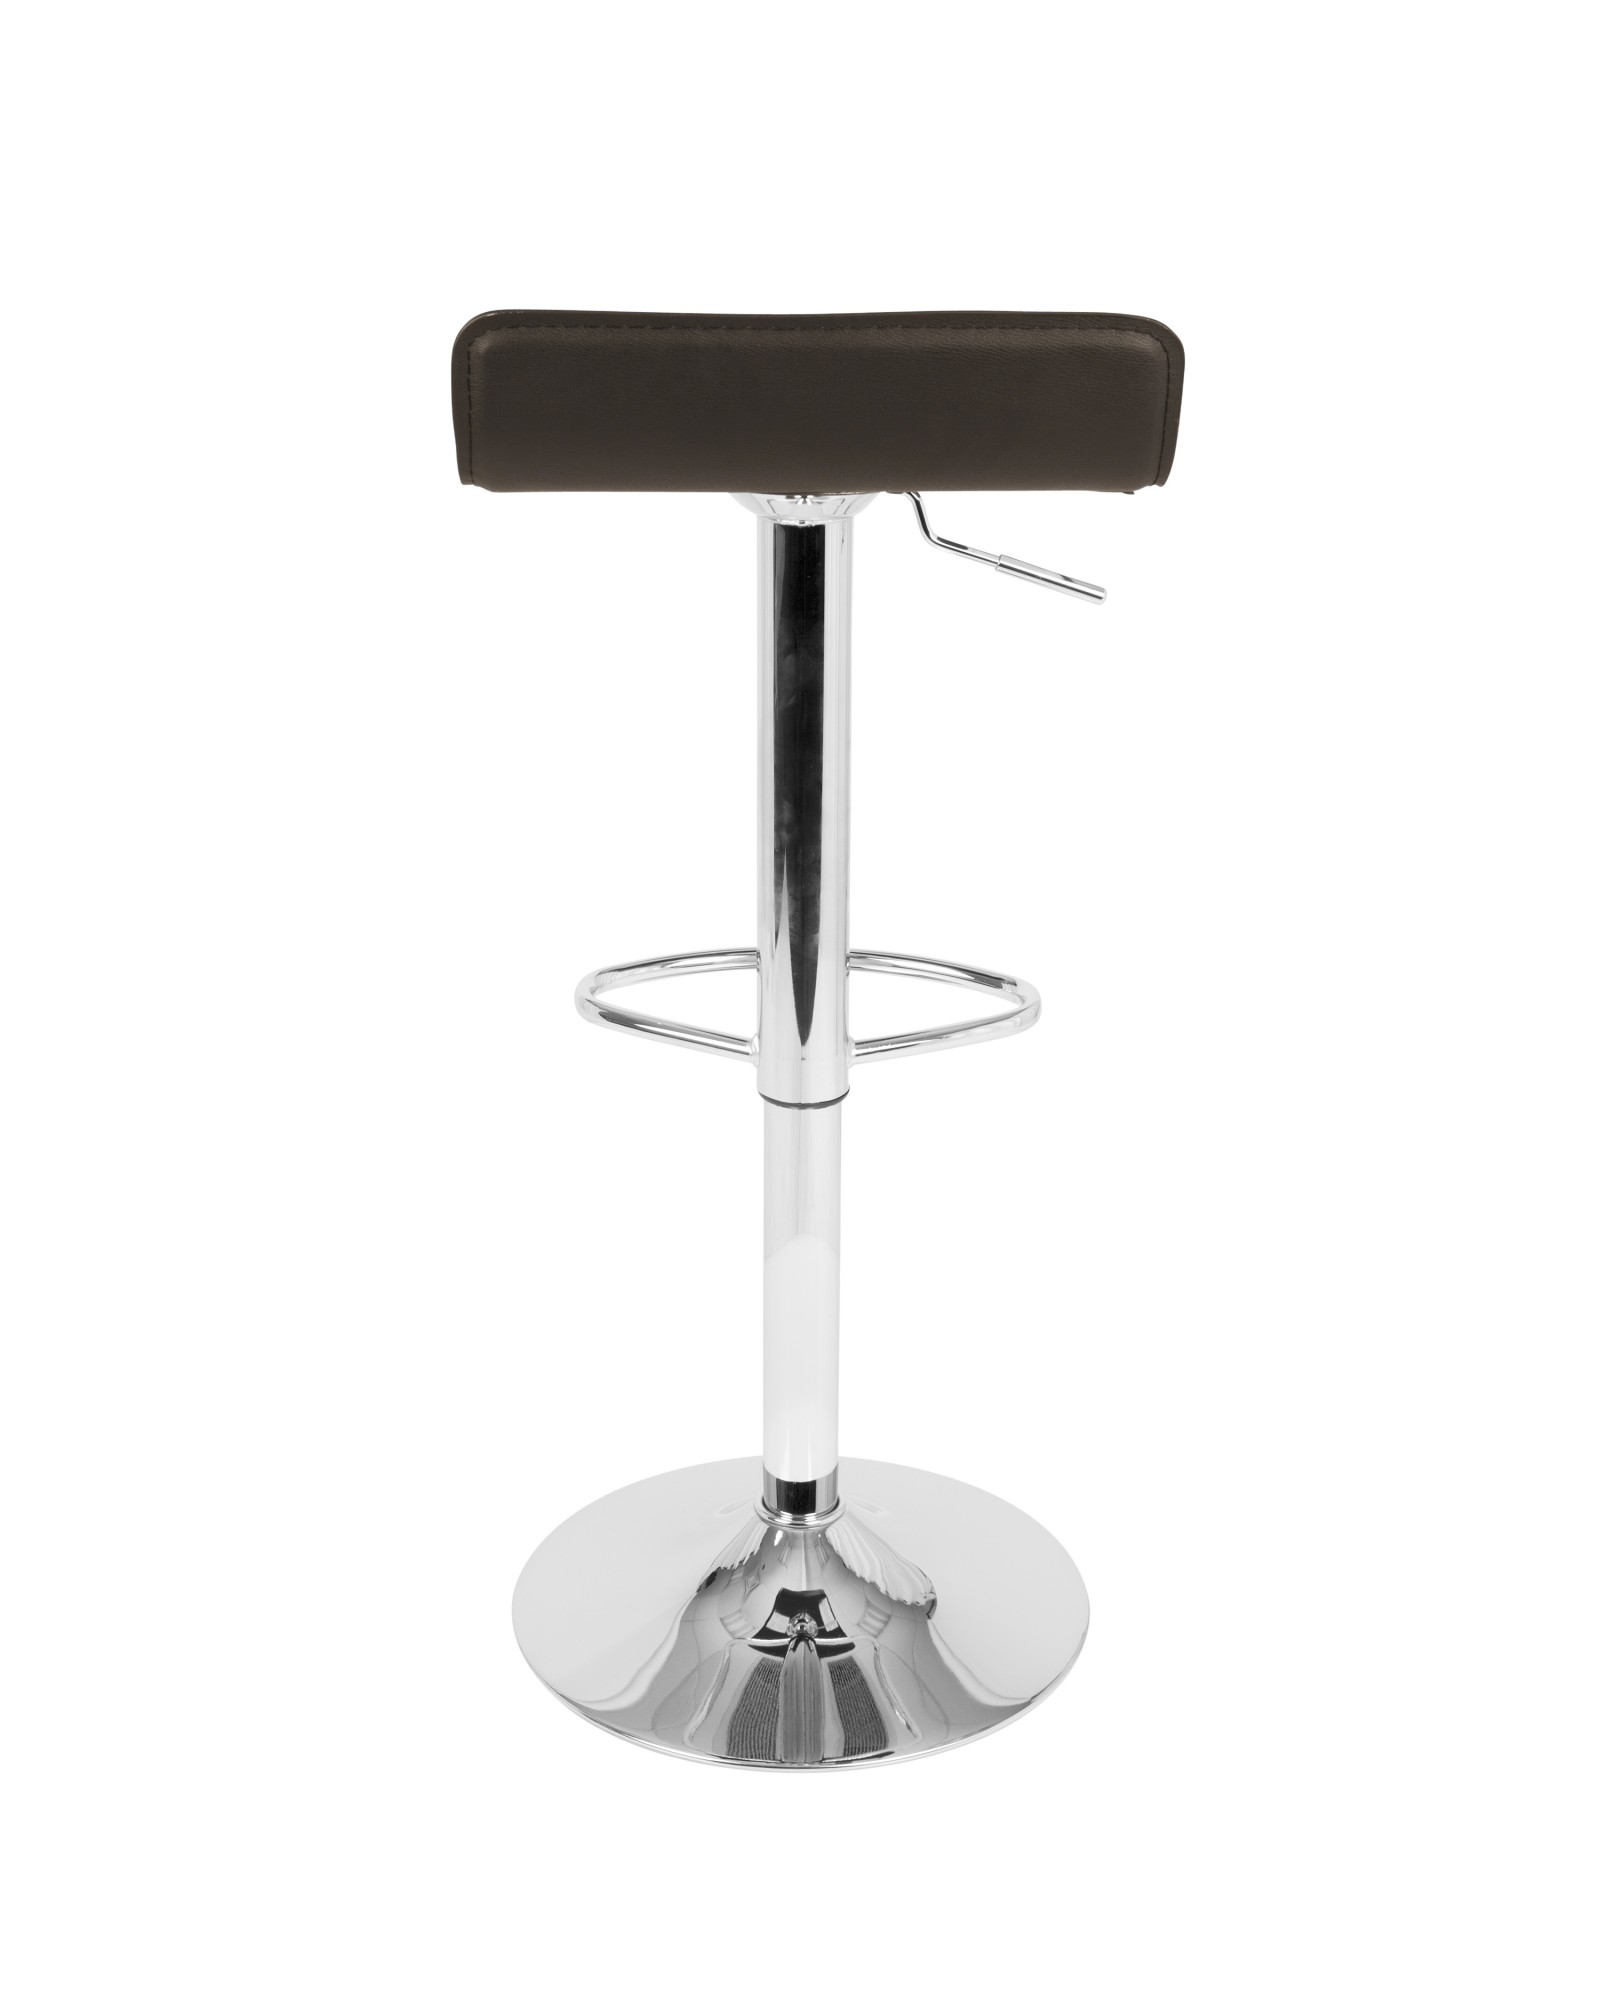 Ale Contemporary Adjustable Barstool in Brown PU Leather - Set of 2